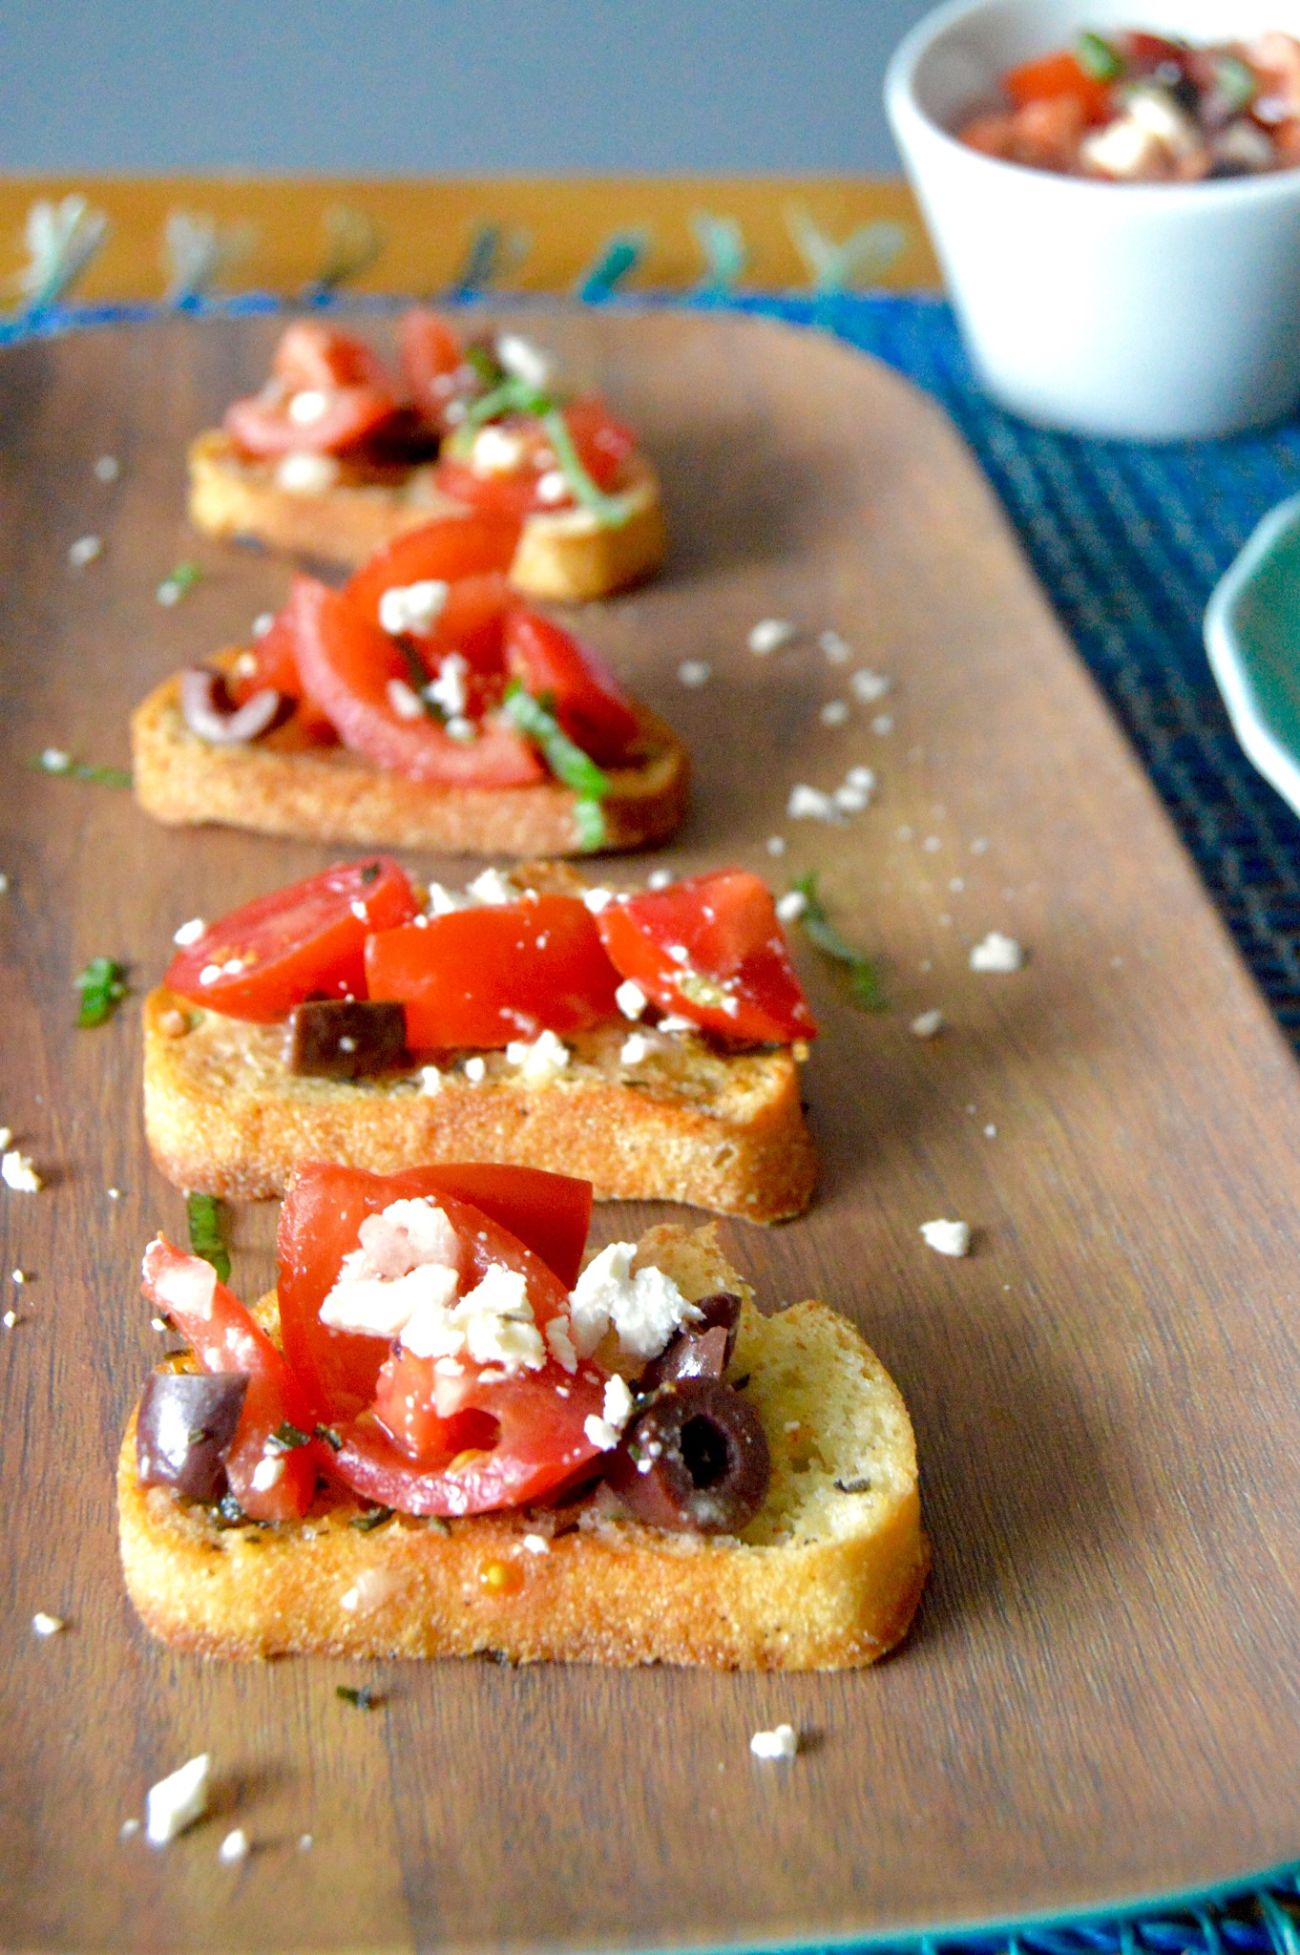 This recipe for Feta Kalamata Bruschetta (aka Greek Style) can be made no time at all and is packed with flavor. Creamy Feta, sweet, juicy tomatoes with just the right amount of salty kalamata olives! Put on top of your favorite toast or serve it alone as a simple salad!